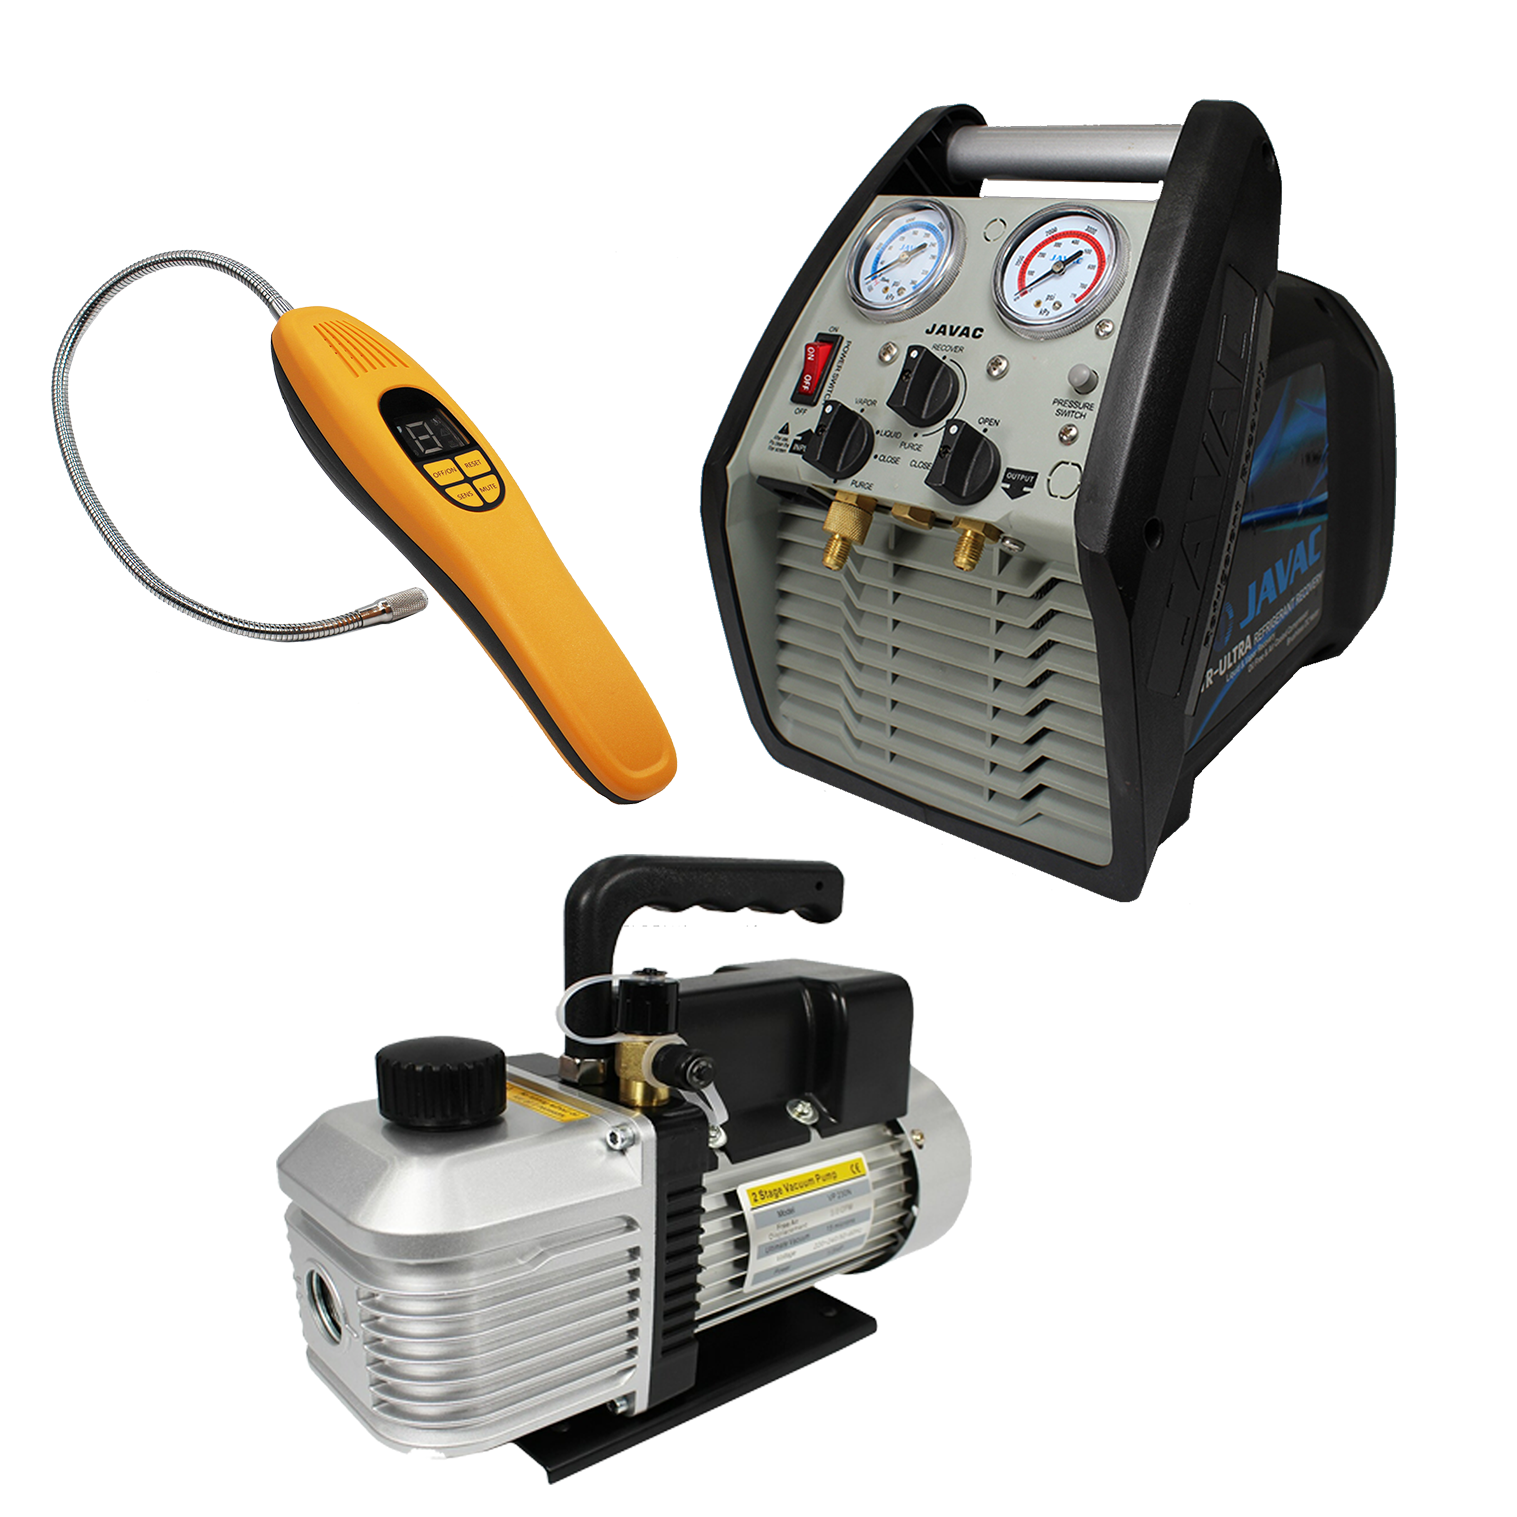 HVACDIRECT Entry HVAC Kit (Pump, Recovery Unit & Leak Detector)